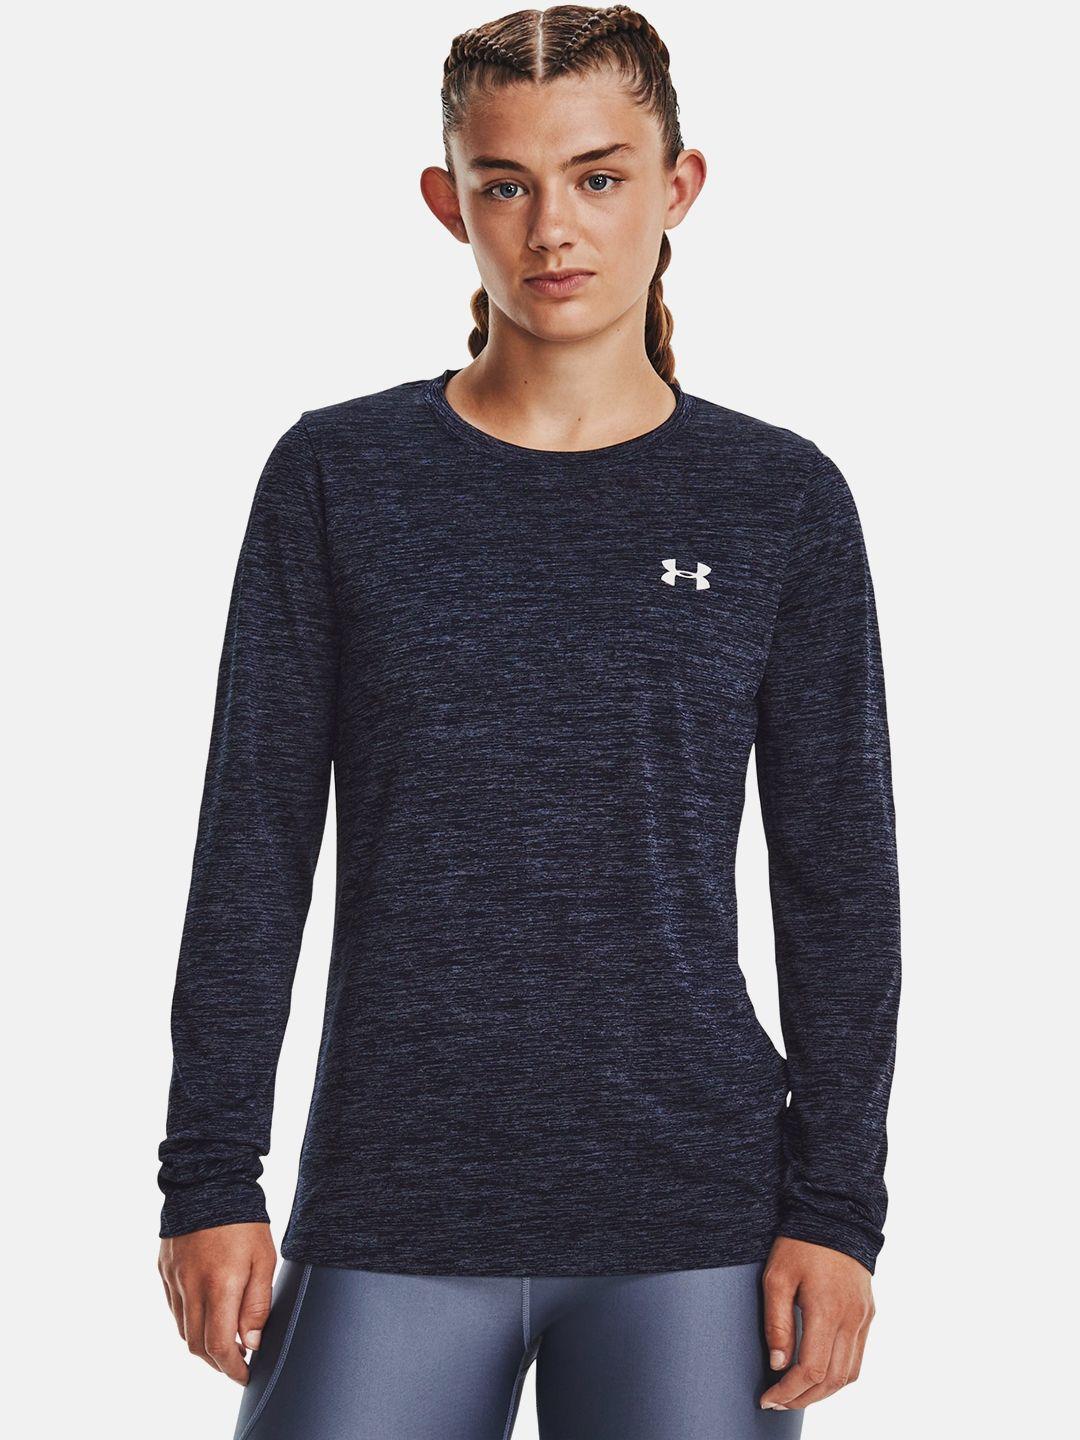 under armour self-designed full-sleeves quick dry ua tech training t-shirt